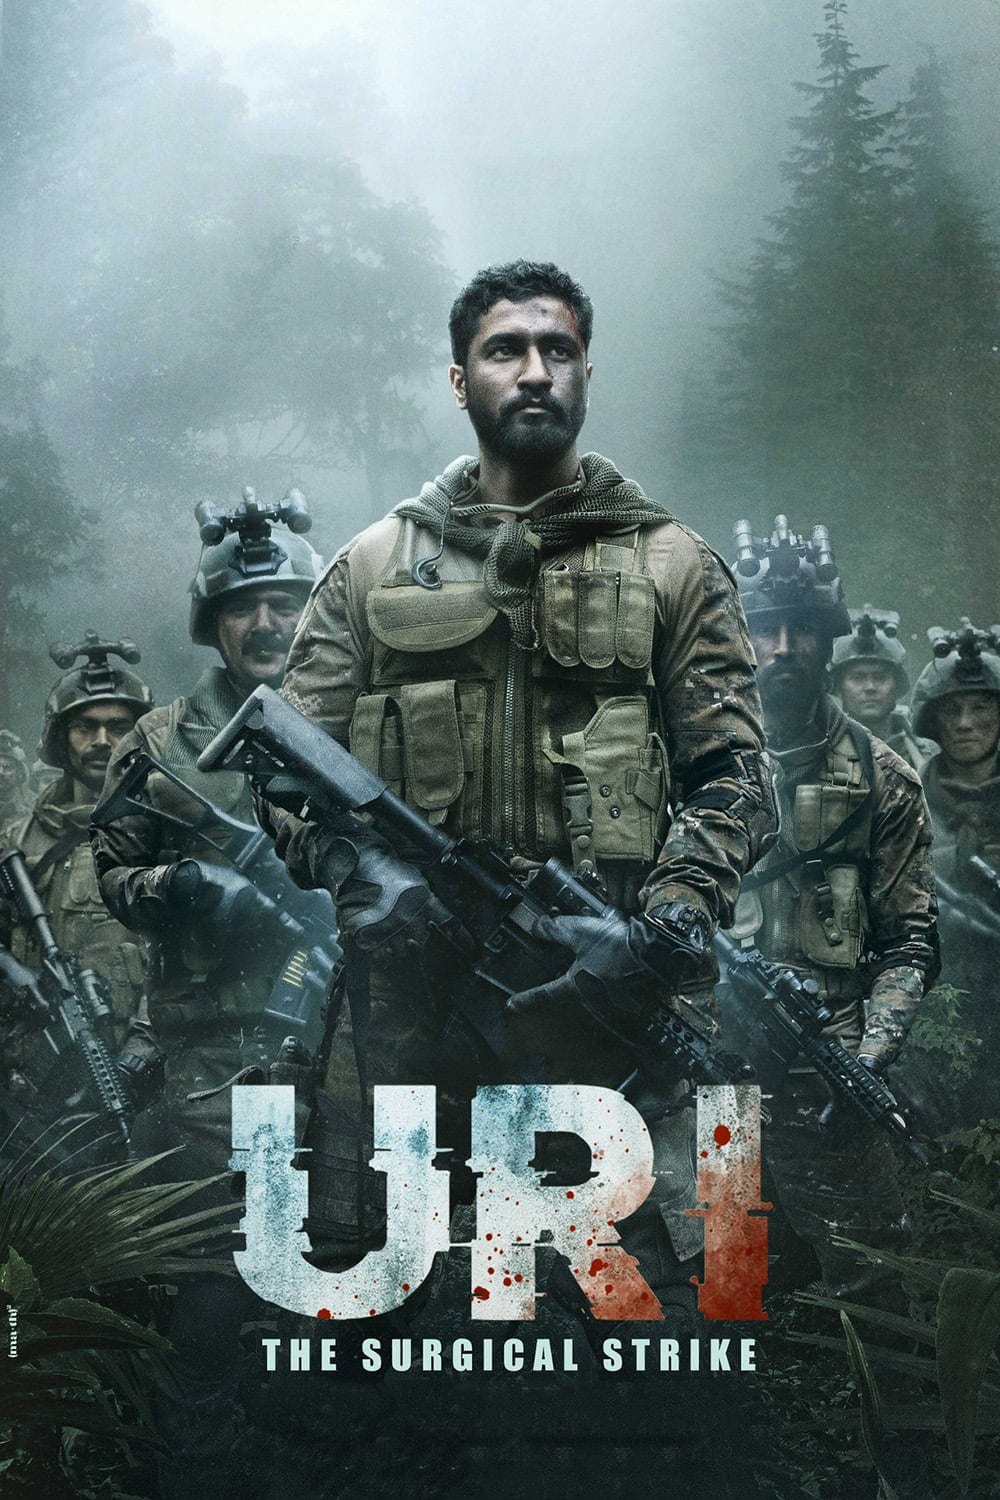 Poster for the movie "Uri: The Surgical Strike"